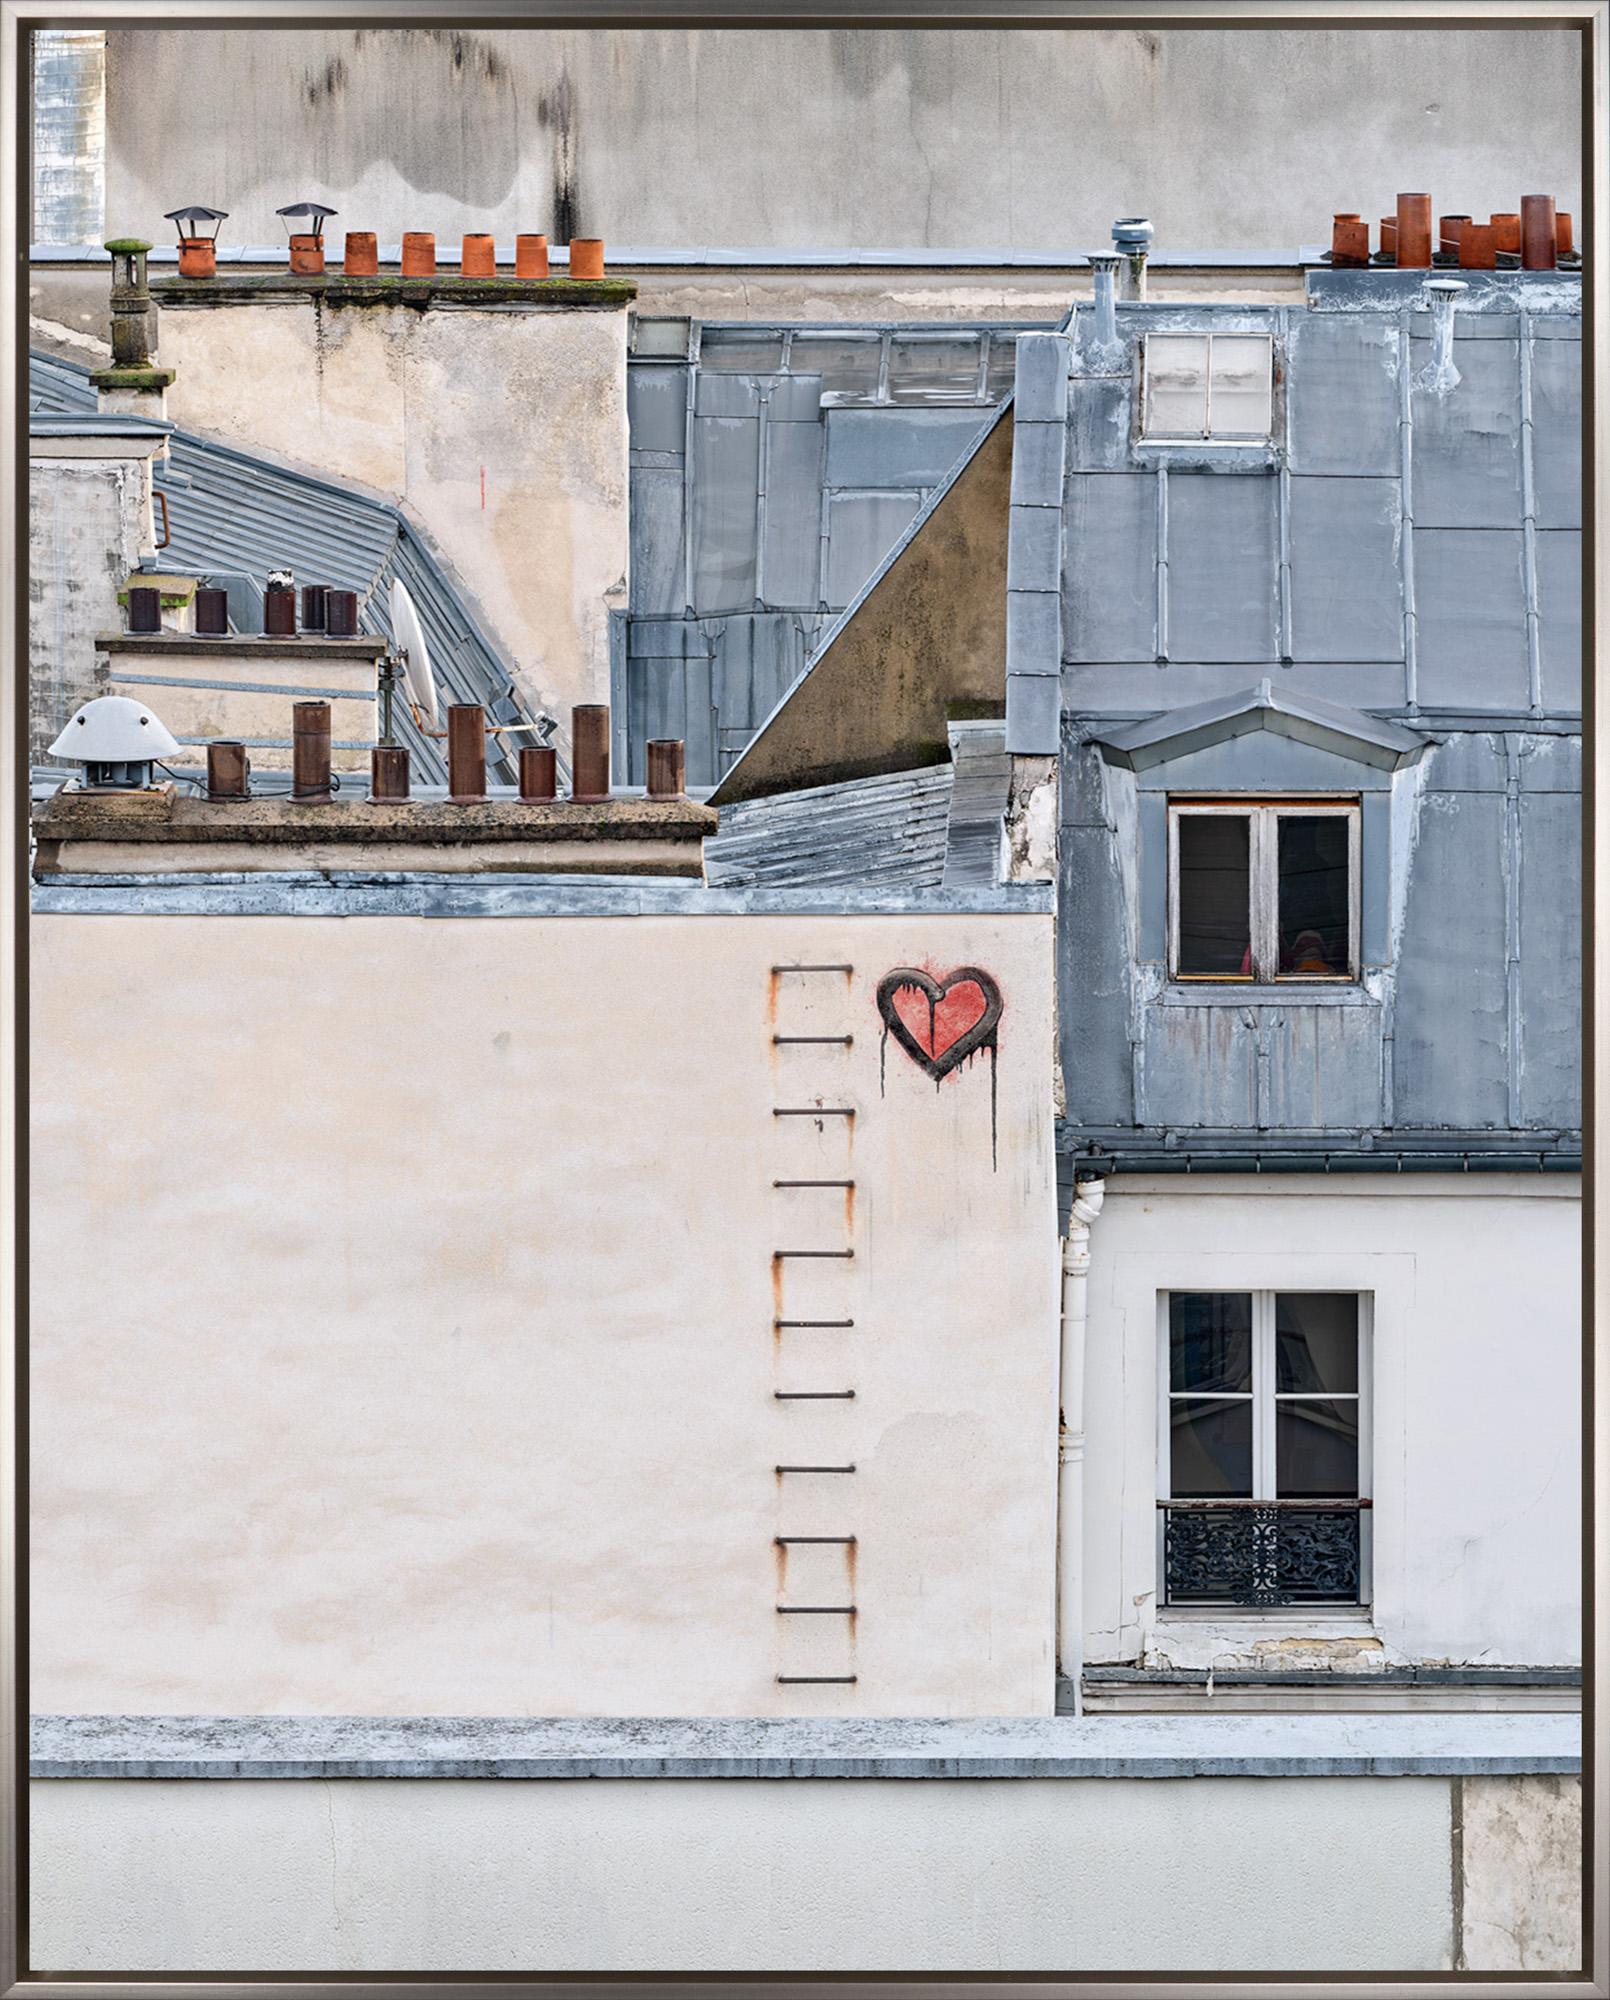 David Burdeny Color Photograph - "Amore, Paris, France" Contemporary Architectural Framed Photograph on Aluminum